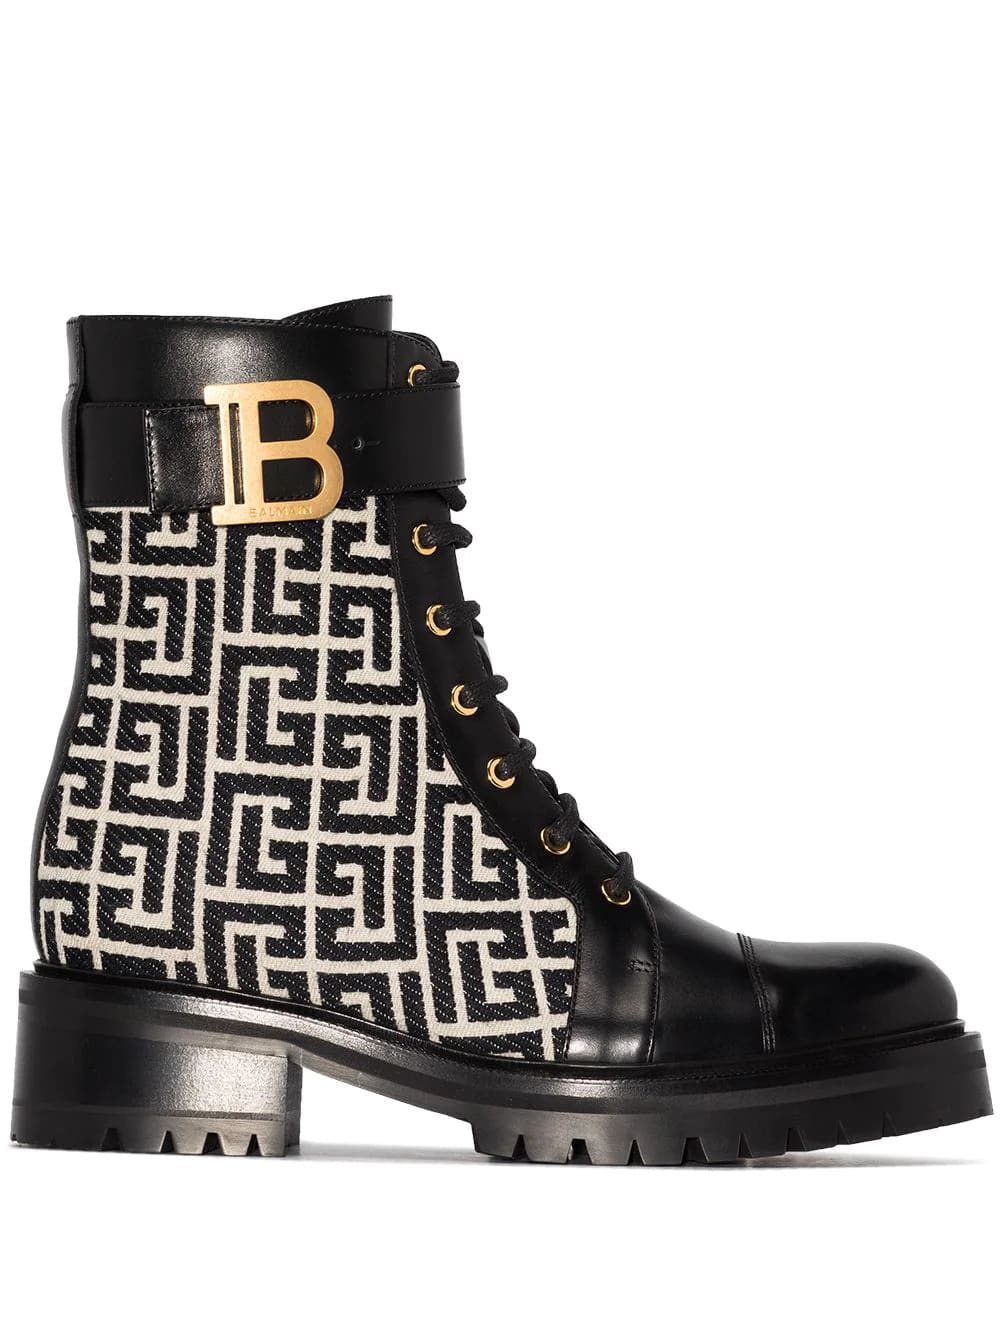 Balmain Woman Ranger Romy Ankle Boot In Black And Ivory Bicolor Jacquard